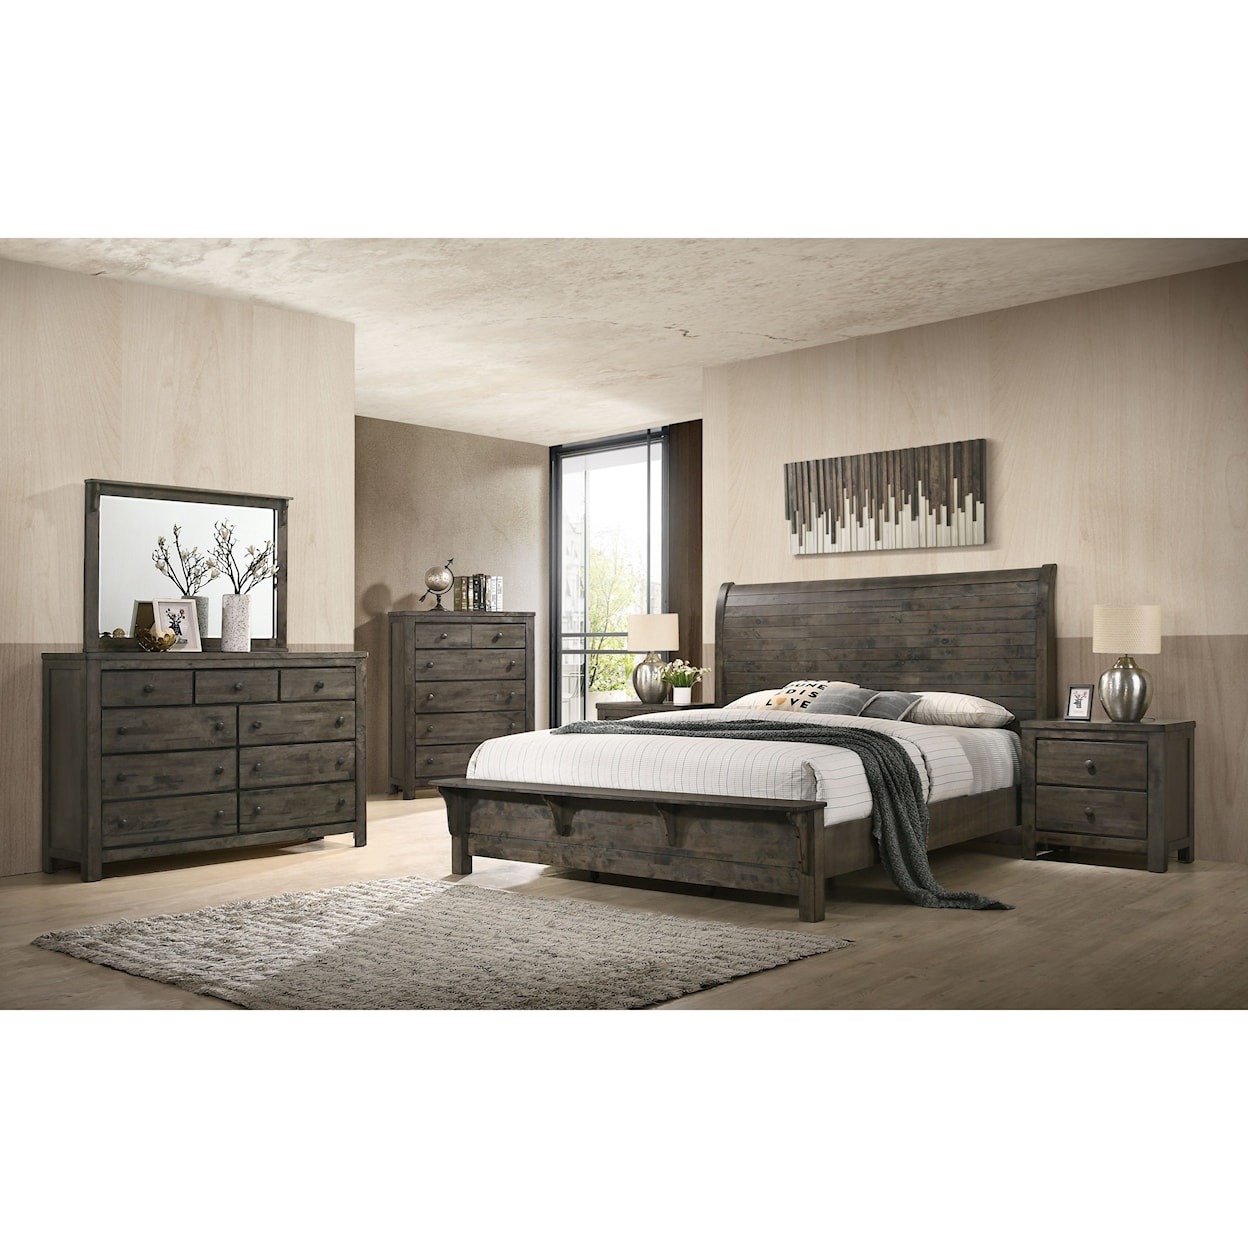 Lifestyle B8108 Queen Bed